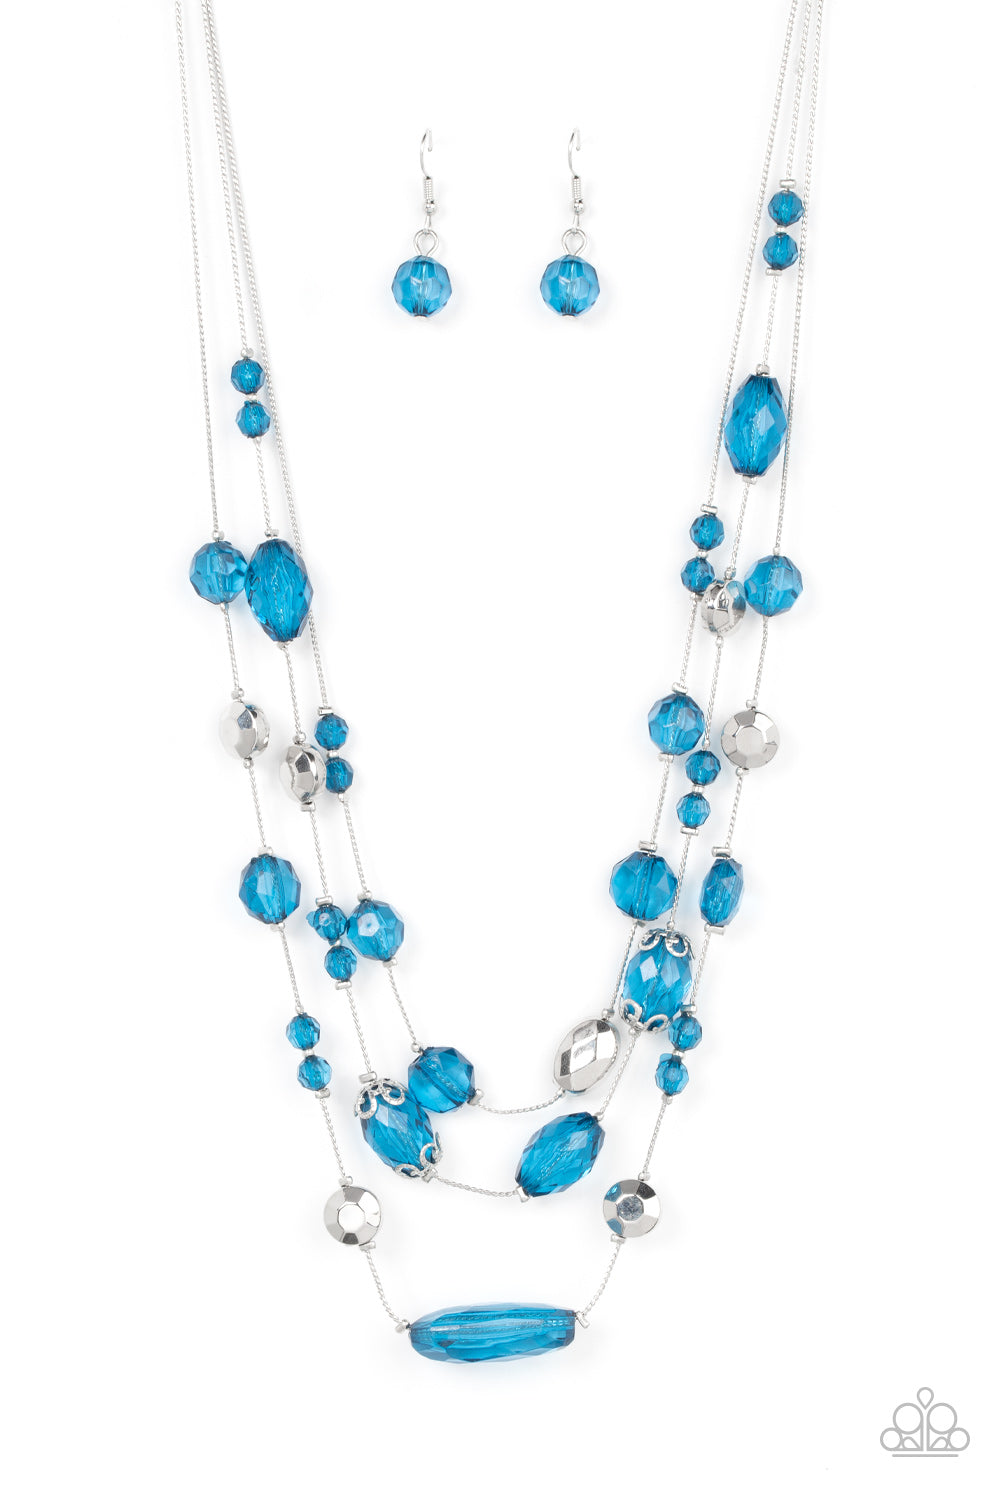 Prismatic Pose - Mykonos Blue and Silver Necklace - Paparazzi Accessories - Variety of faceted silver beads and Mykonos Blue crystal-like accents are fitted in place along layers of silver wire-like chain, resulting in a prismatic pop of color. Features an adjustable clasp closure fashion necklace.